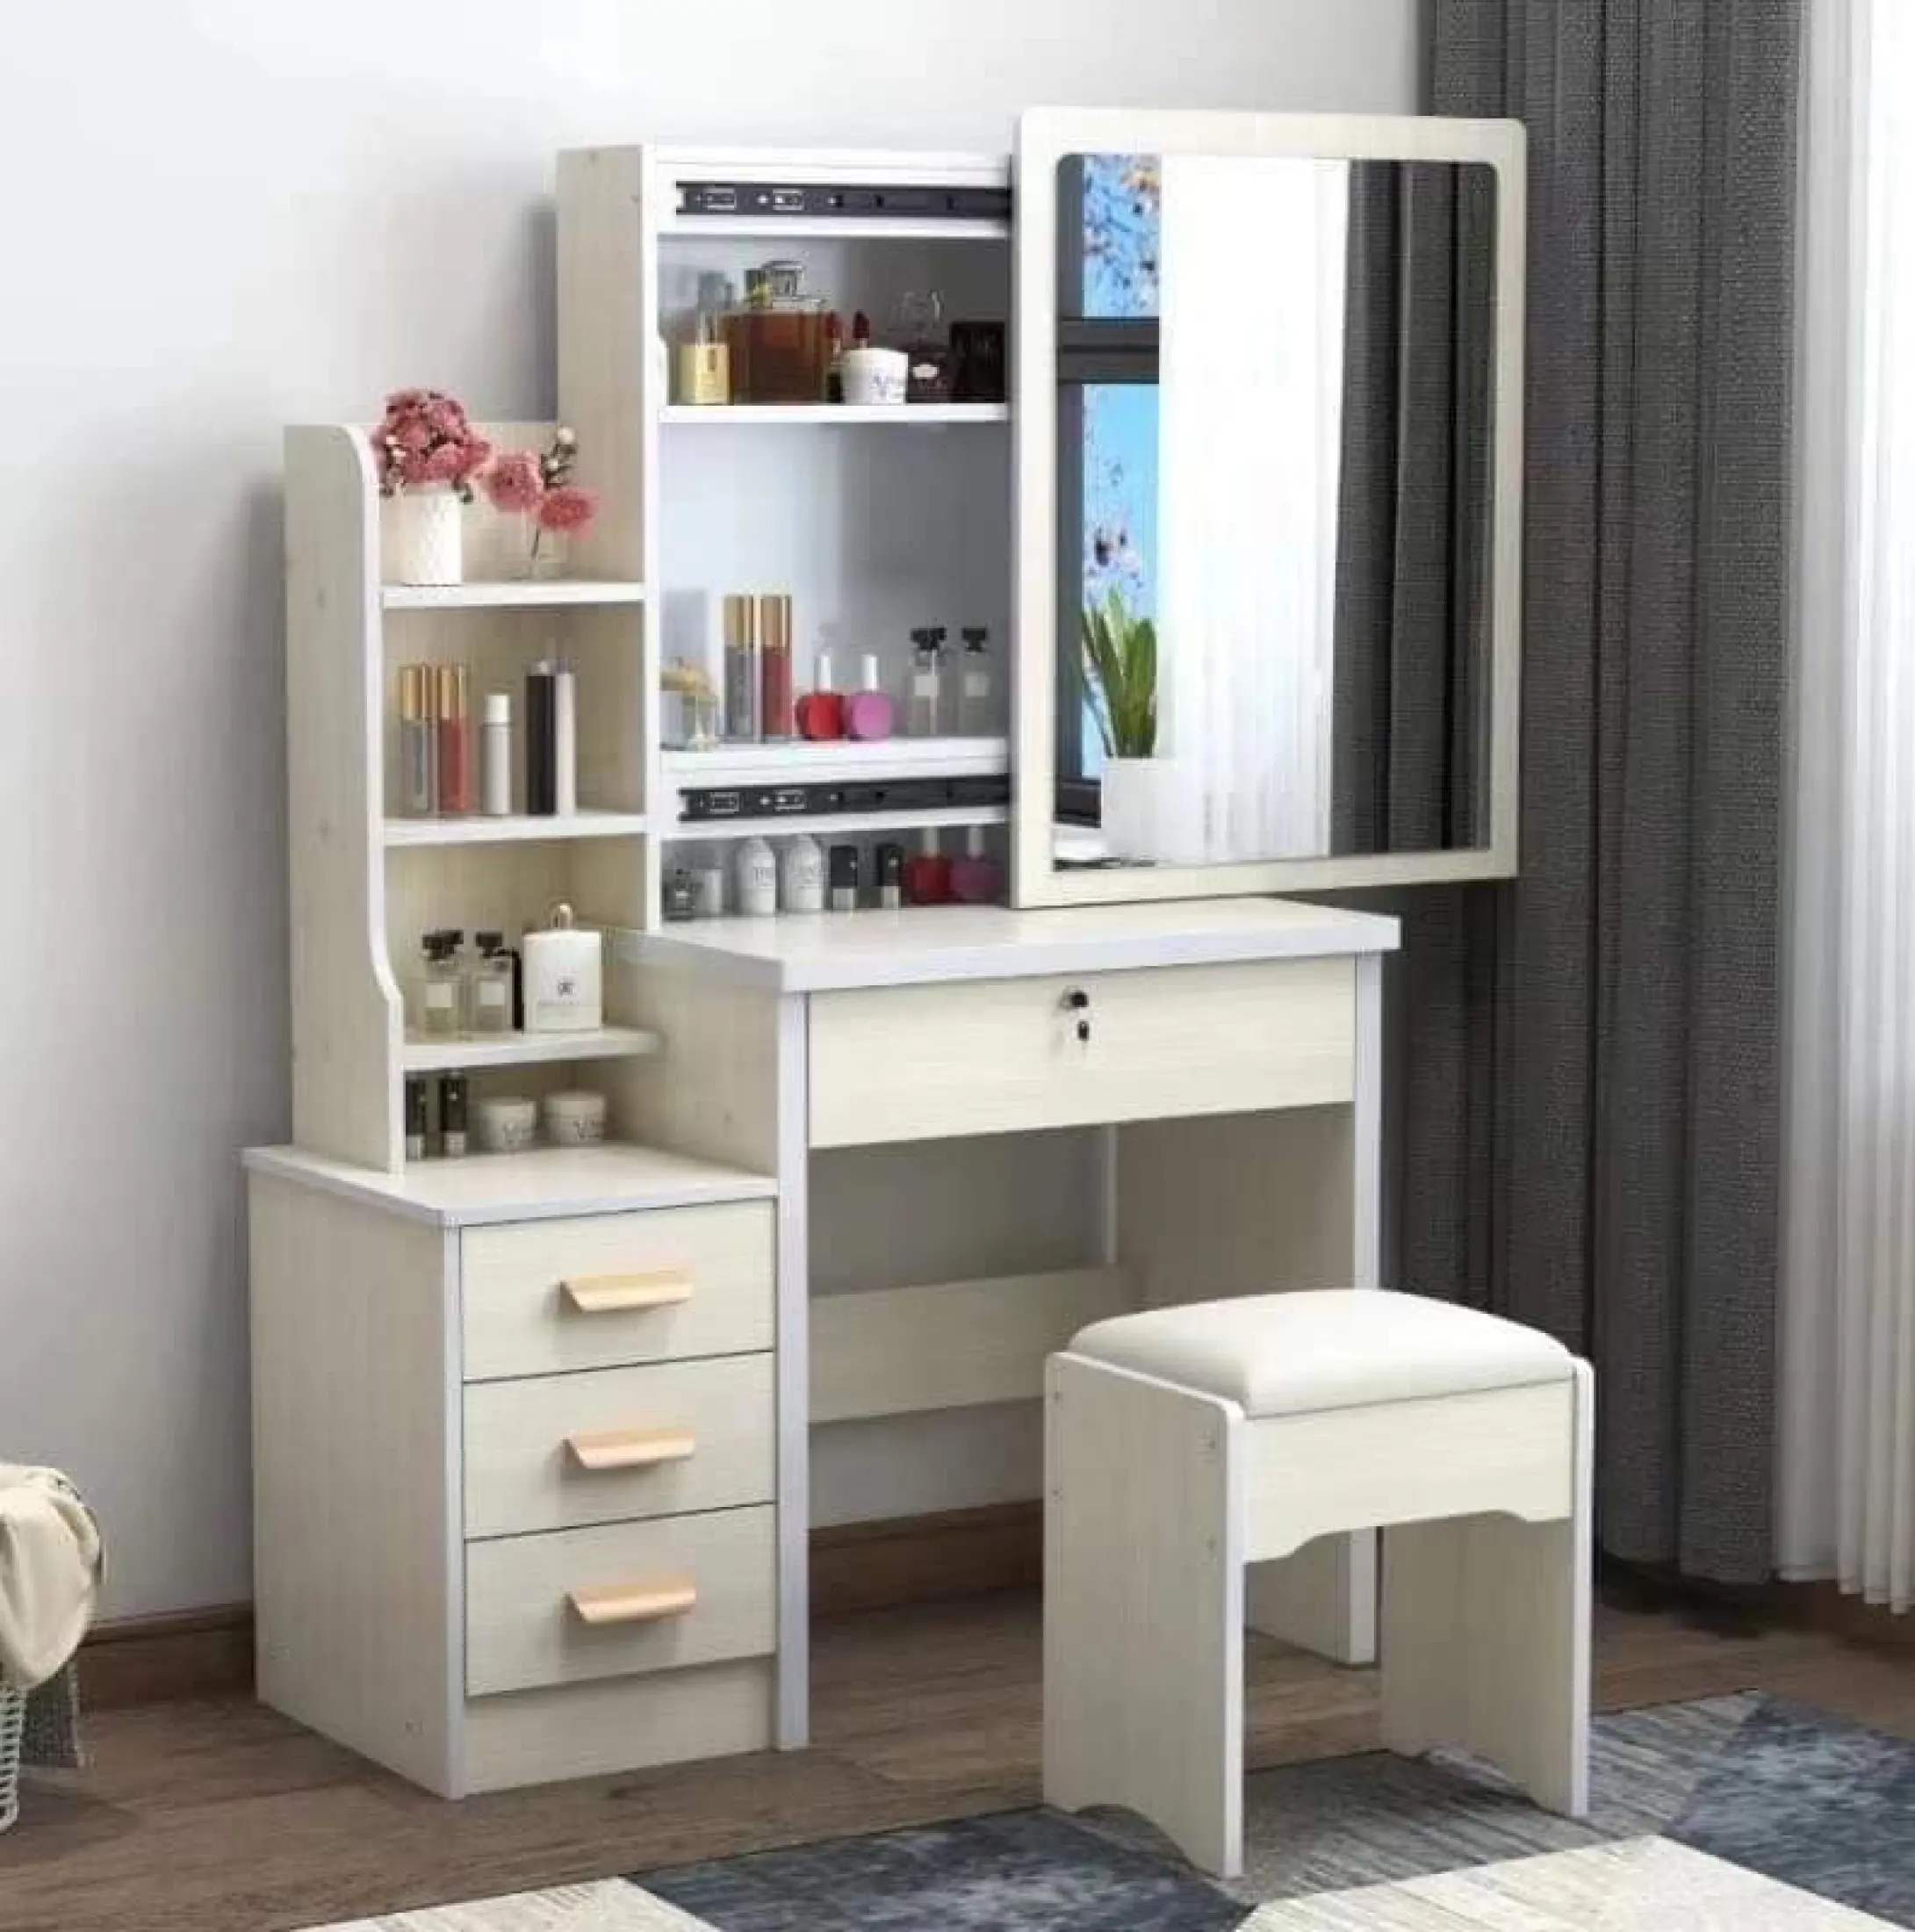 Modern Minimalist Dresser with Five Drawers with Vanity lamp Bedroom Dresser,White a Mirror with Sliding Dressing Table and stools 